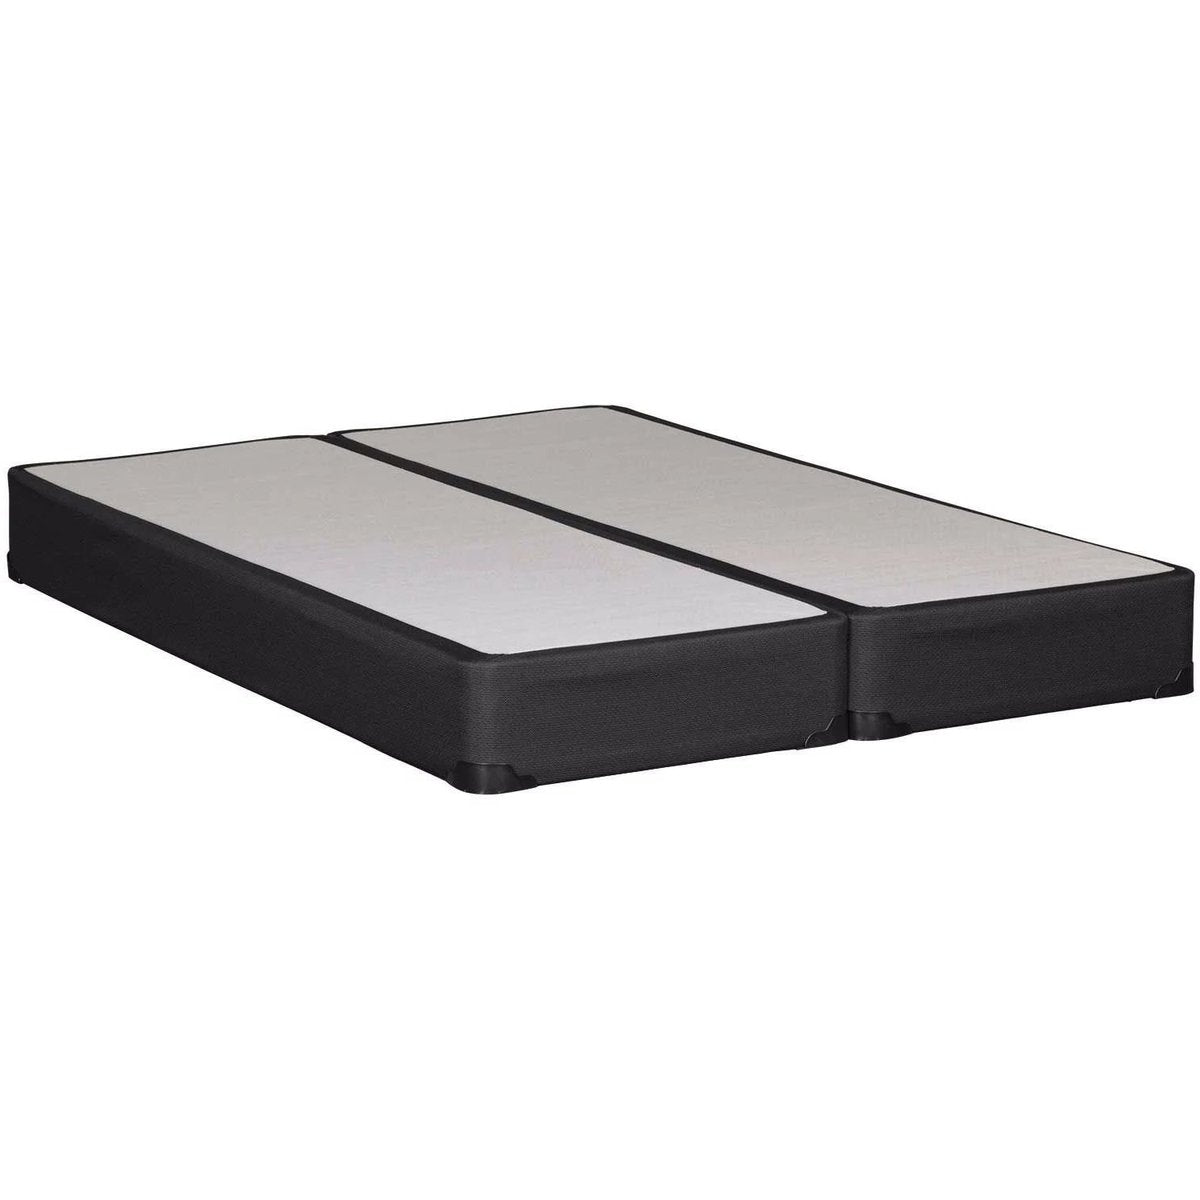 QUEEN SPLIT (QUEEN IN 2 PCS.) SIZE- (8" THICK- HIGH PROFILE- FACTORY SELECT COLOR)- BOX SPRING